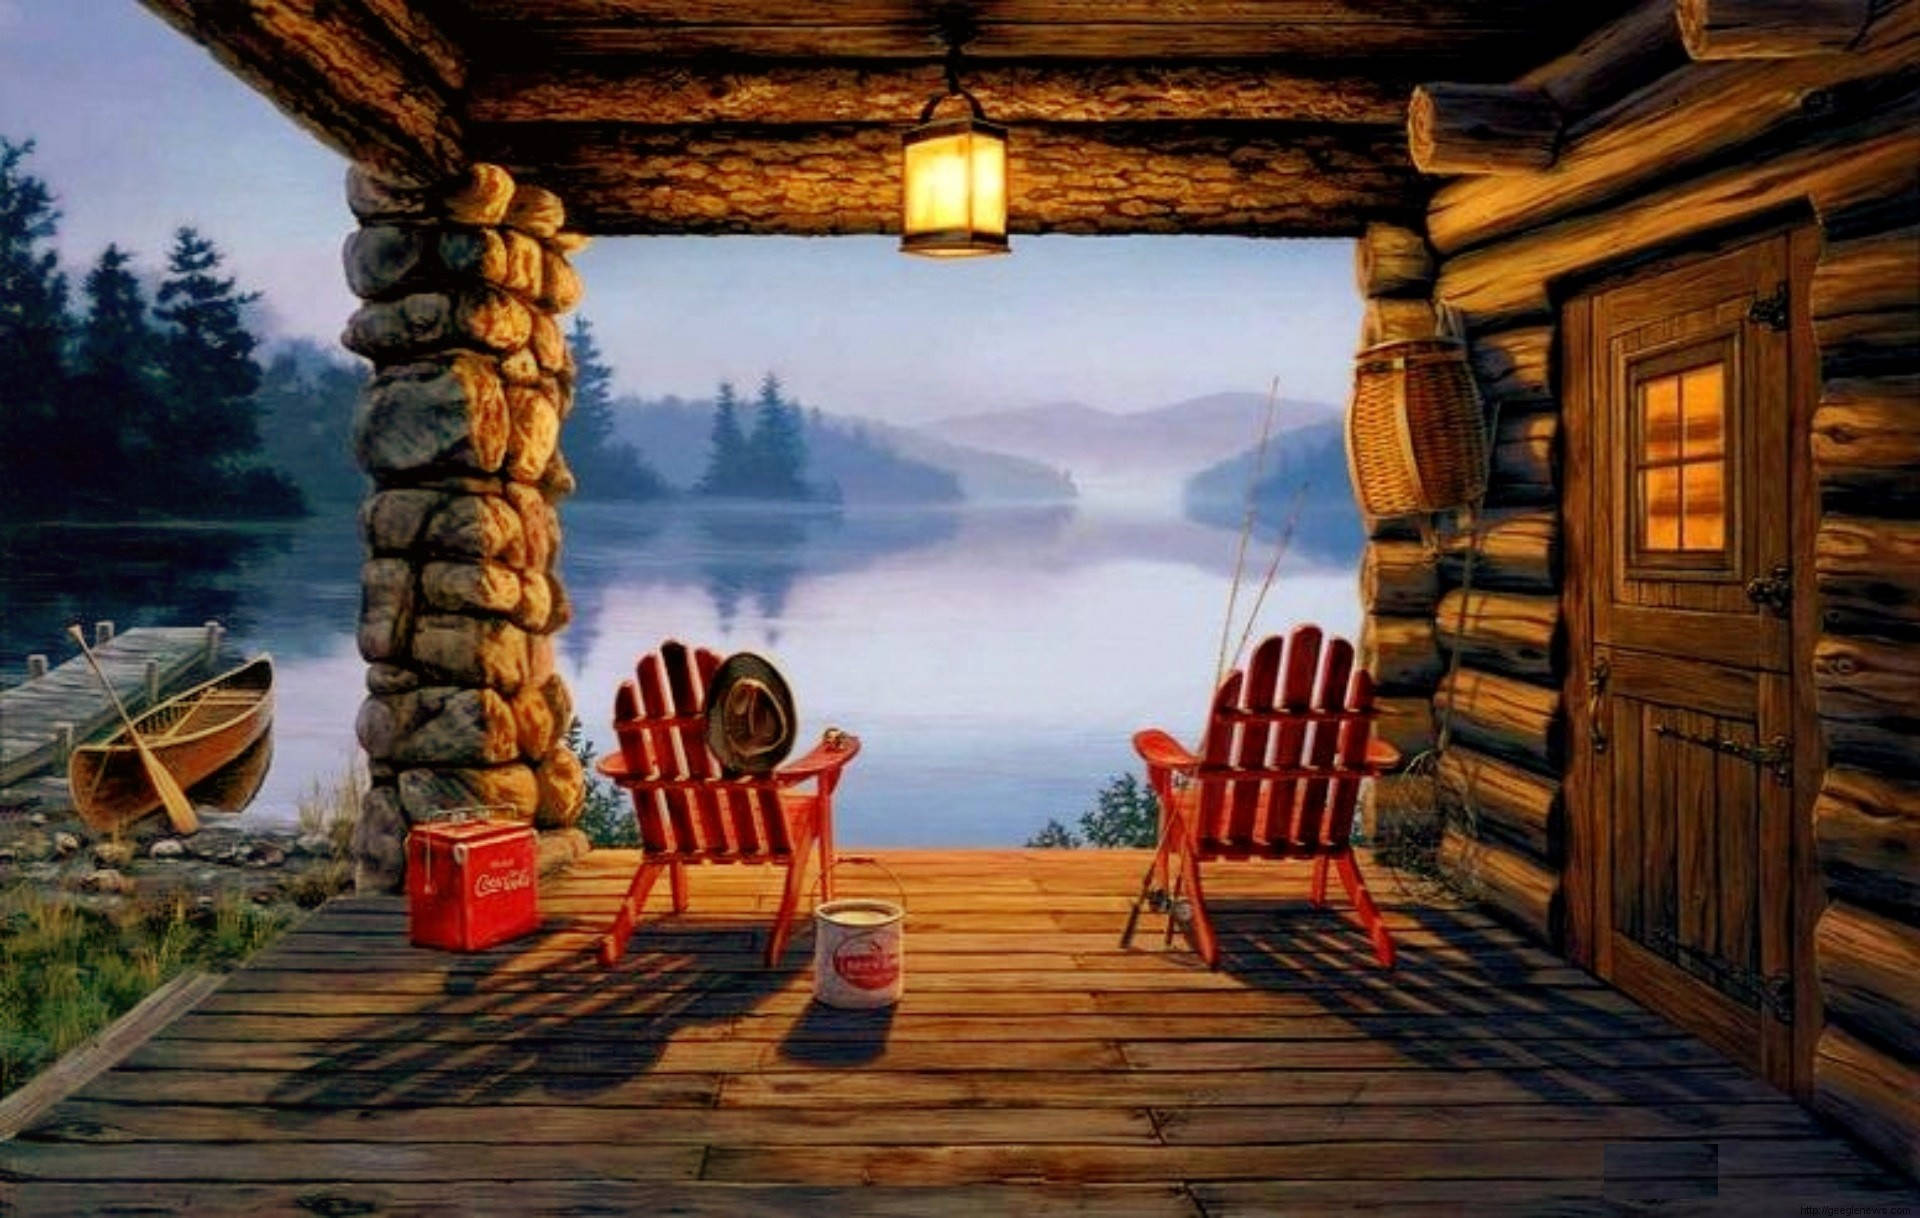 Tranquil Oasis - View from a Wooden House Wallpaper